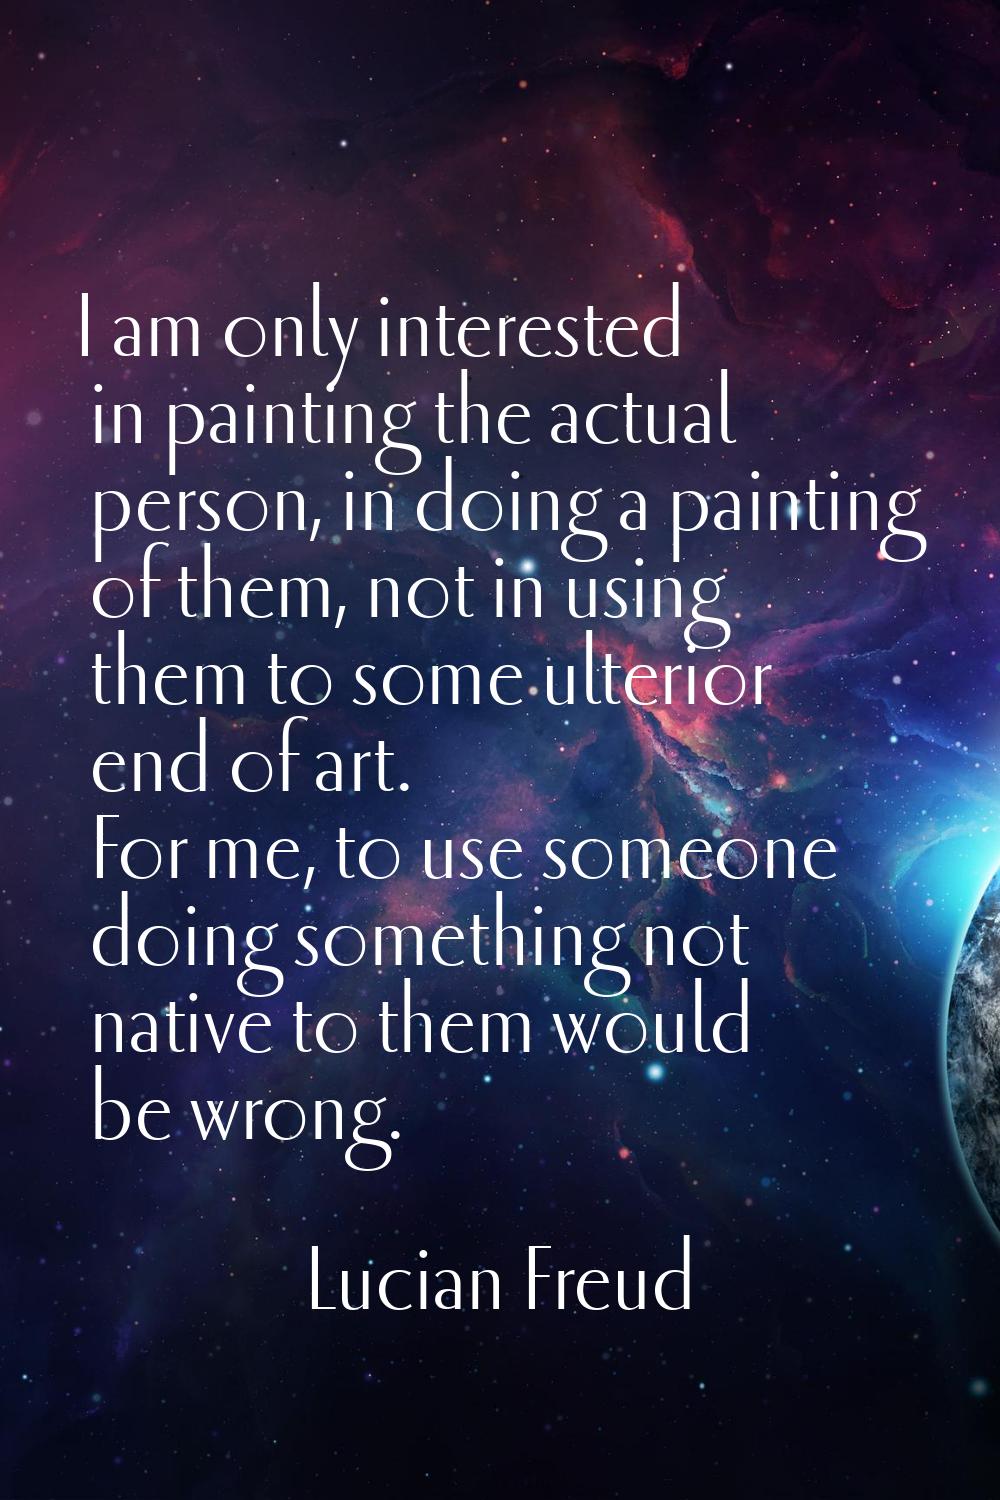 I am only interested in painting the actual person, in doing a painting of them, not in using them 